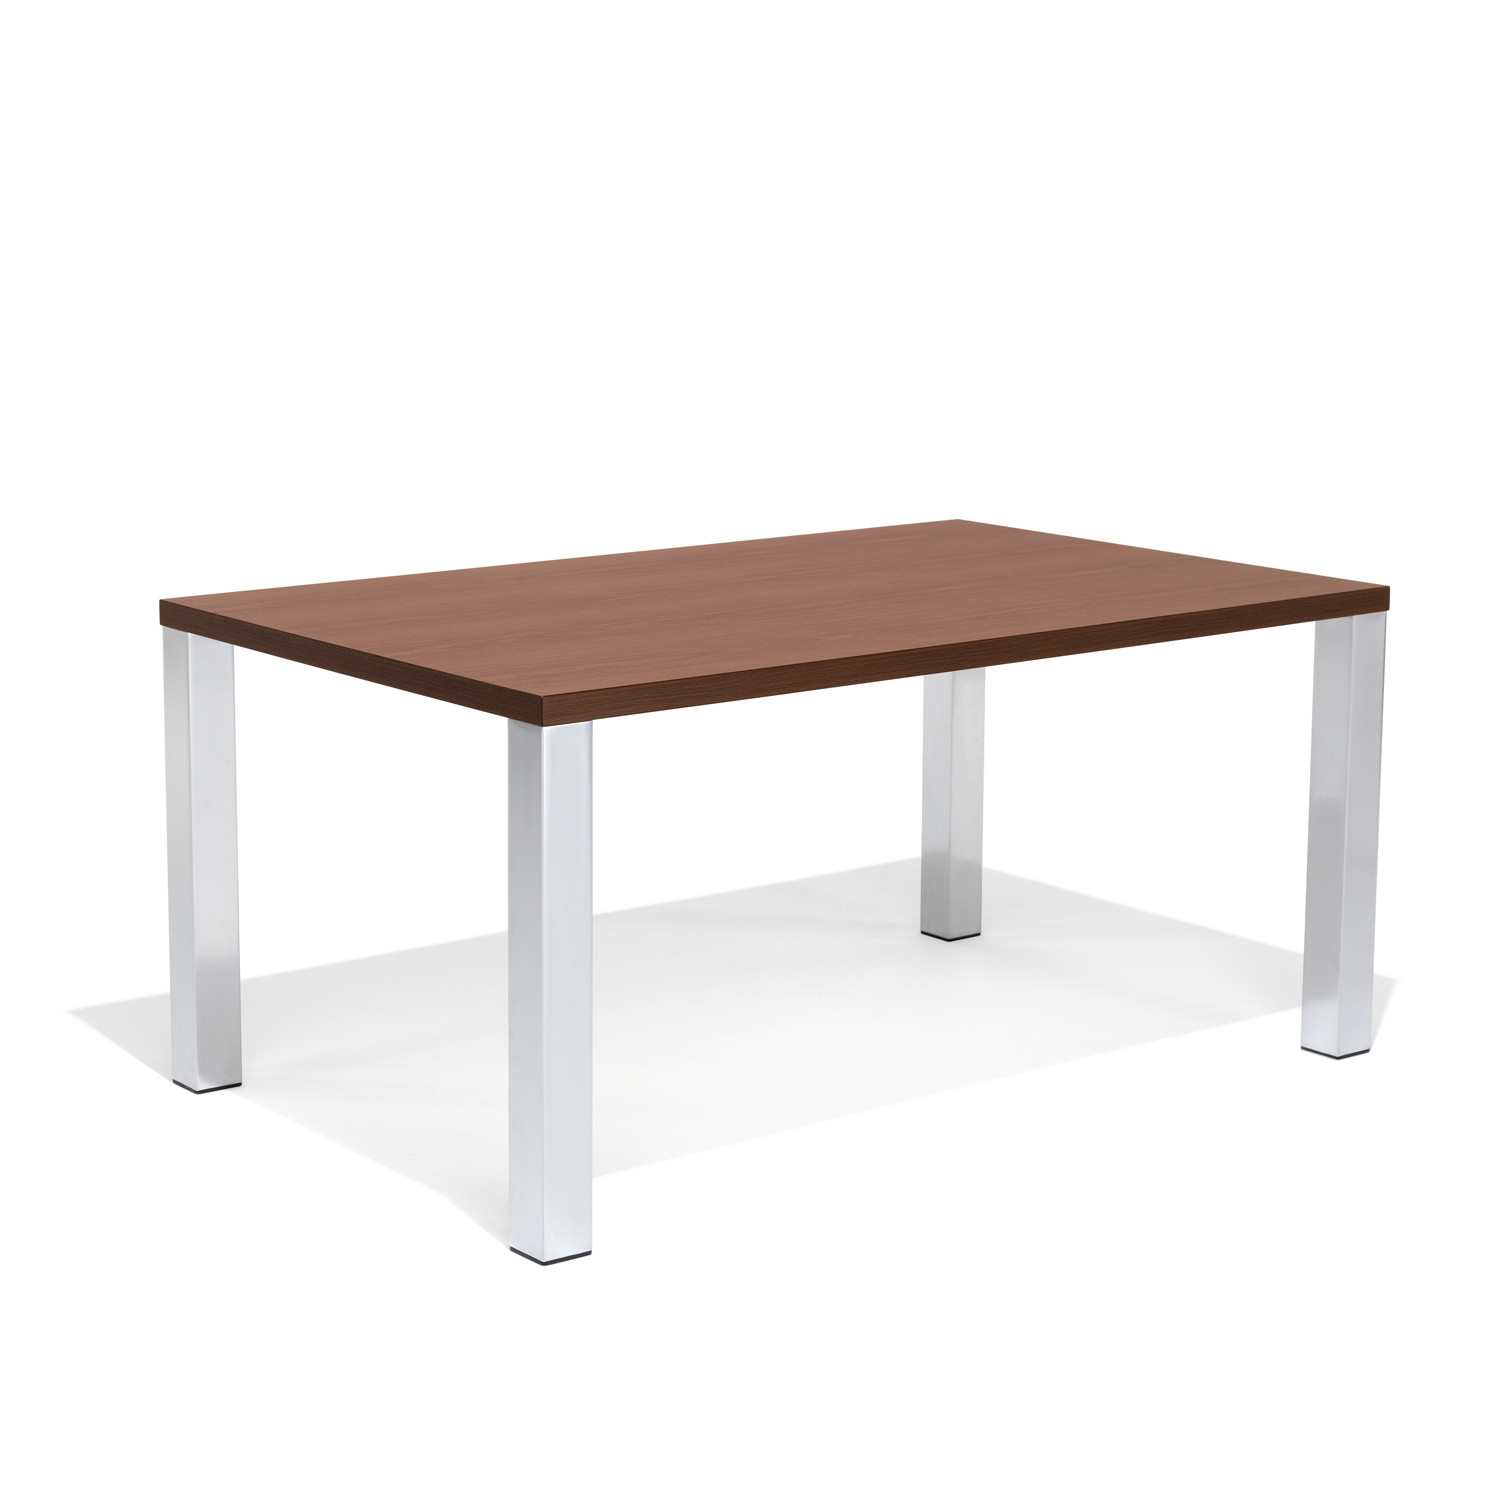 8950 Meeting Table